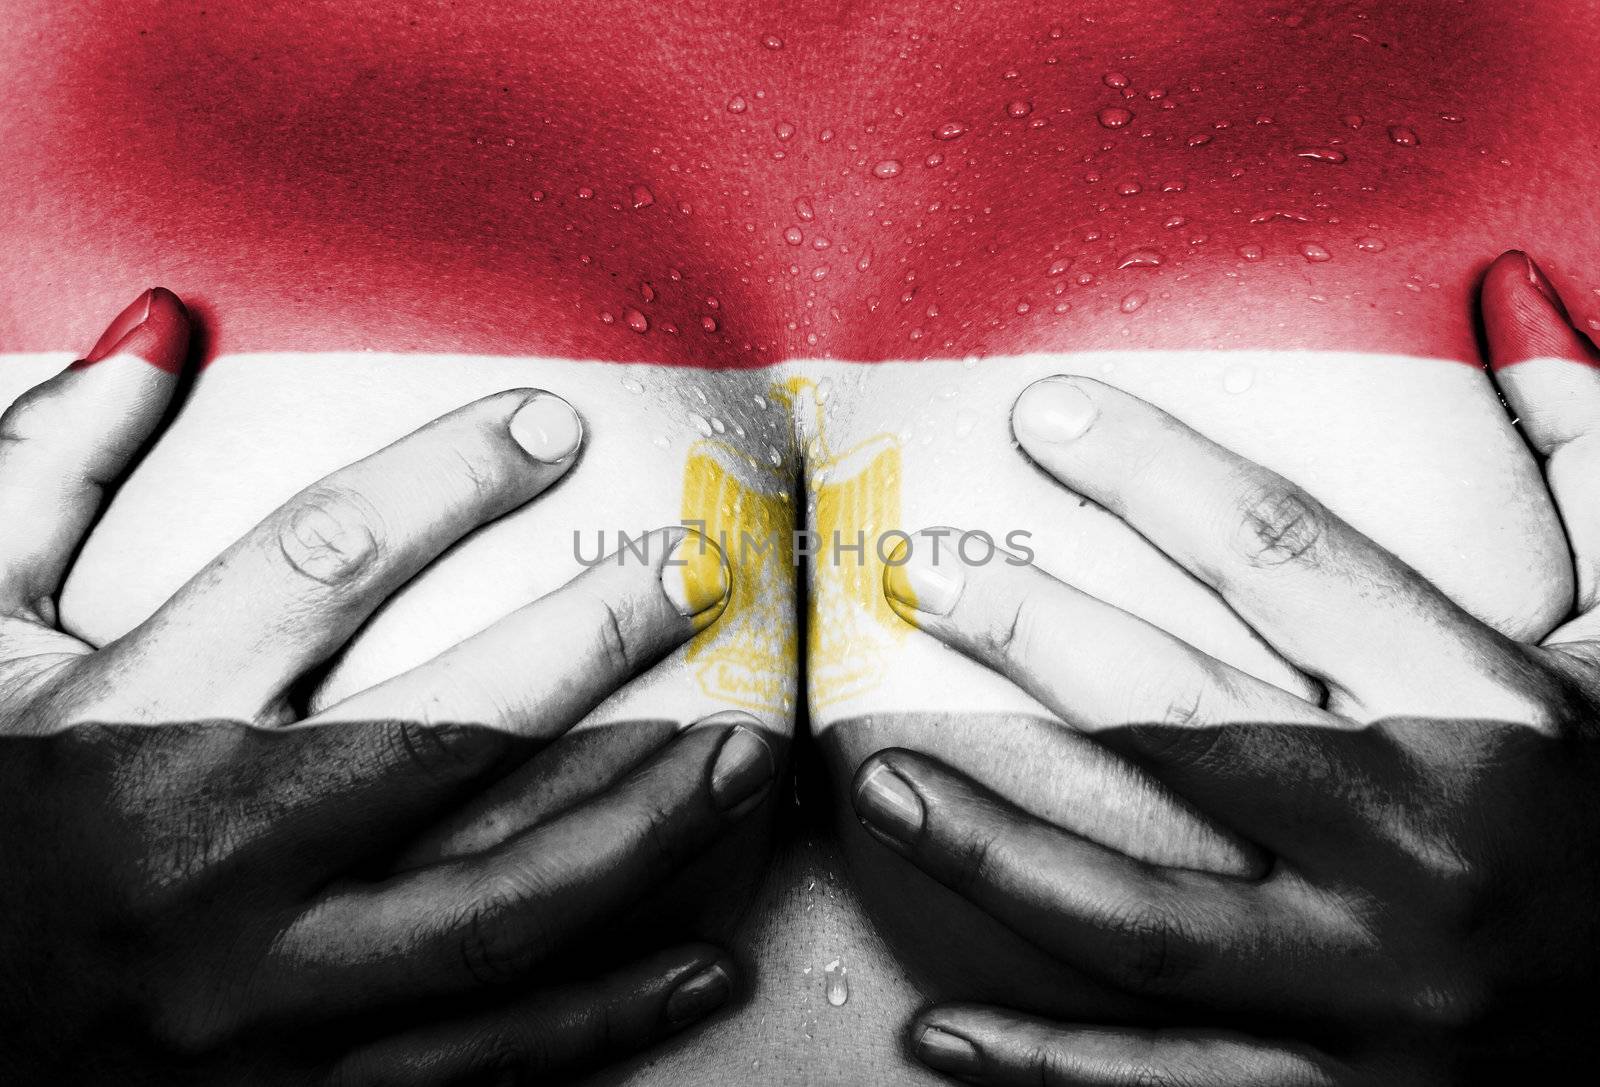 Sweaty upper part of female body, hands covering breasts, flag of Egypt